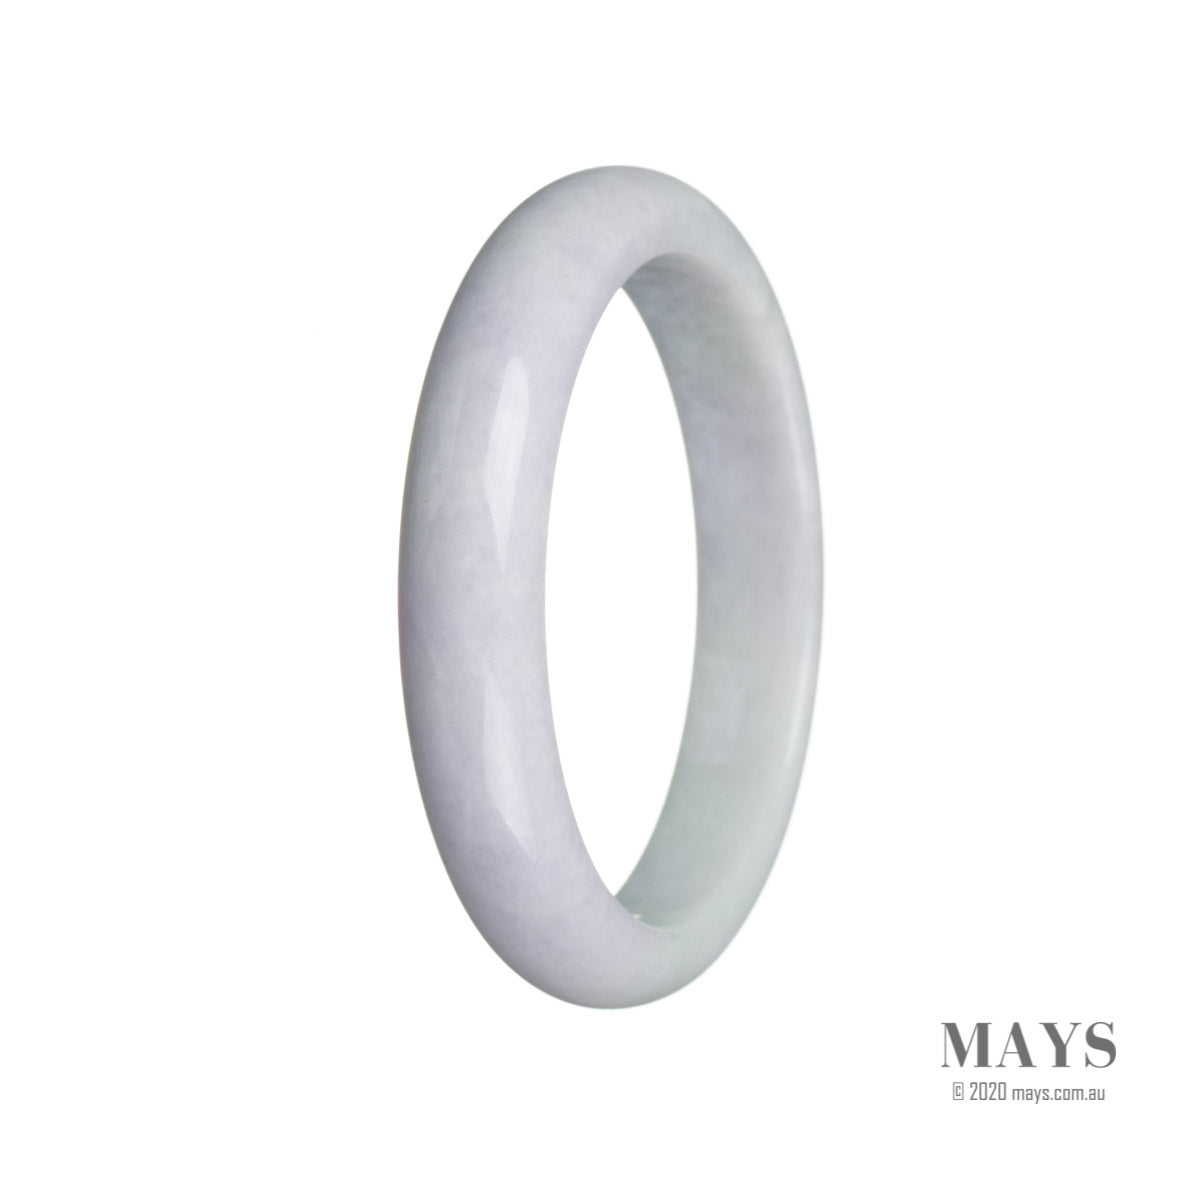 A delicate bracelet made of certified Type A pale lavender and green jadeite jade, featuring a semi-round shape measuring 59mm. Crafted by Mays Gems.